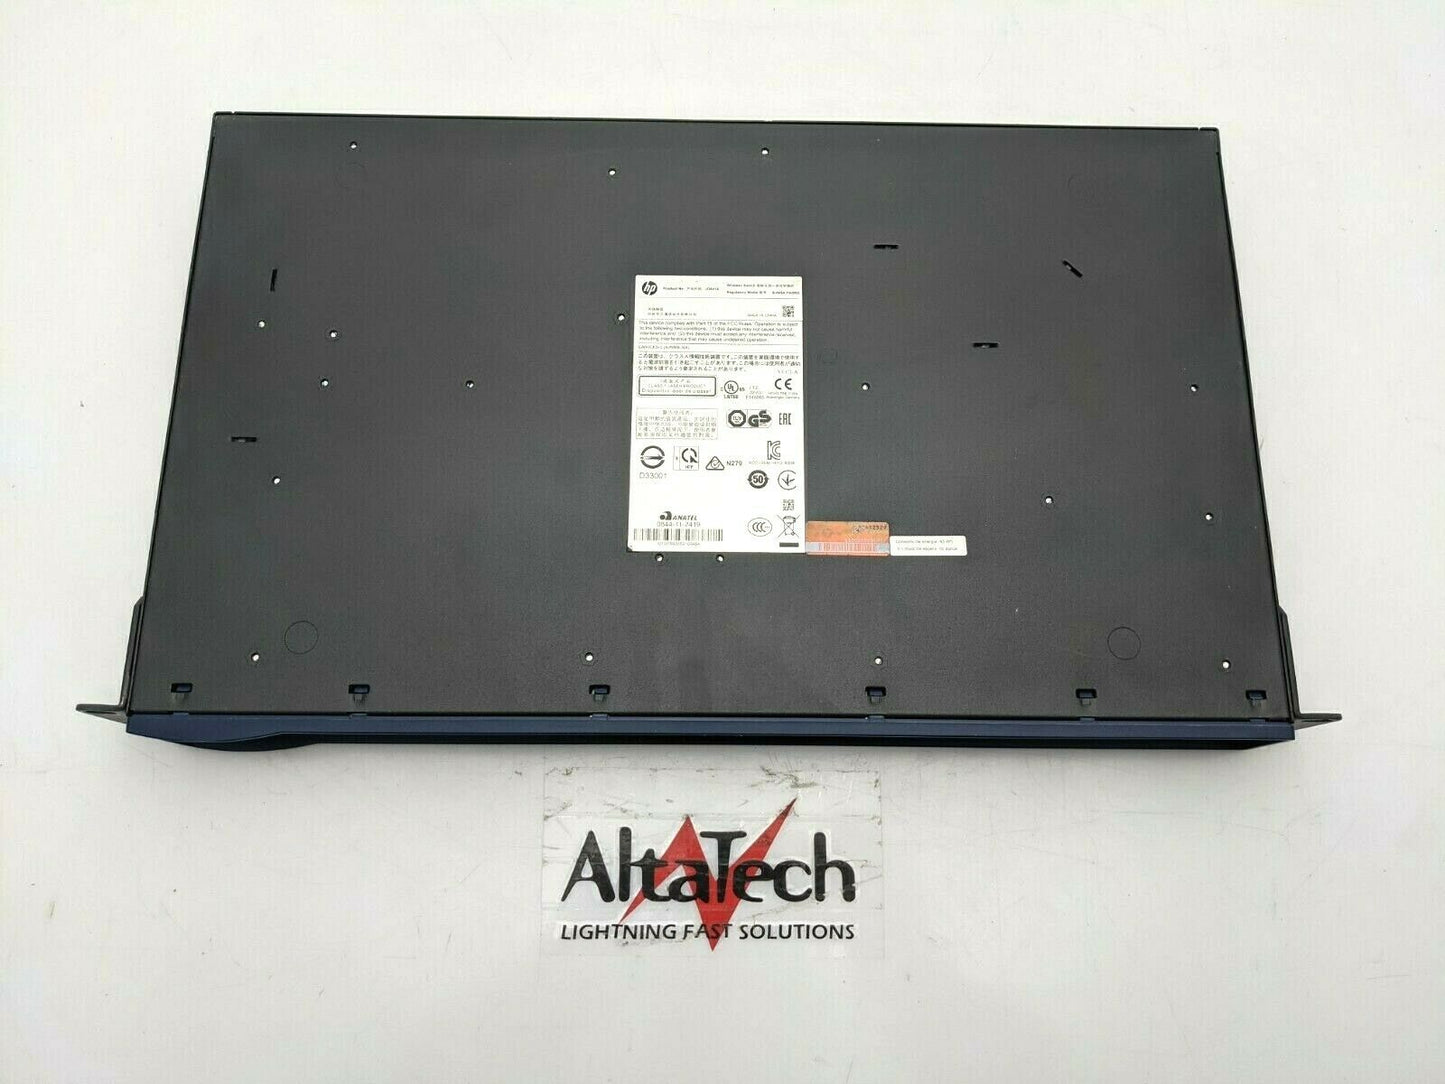 Dell JG641A ProCurve 830 8-Port PoE+ Unified Wired-WLAN Network Switch, Used